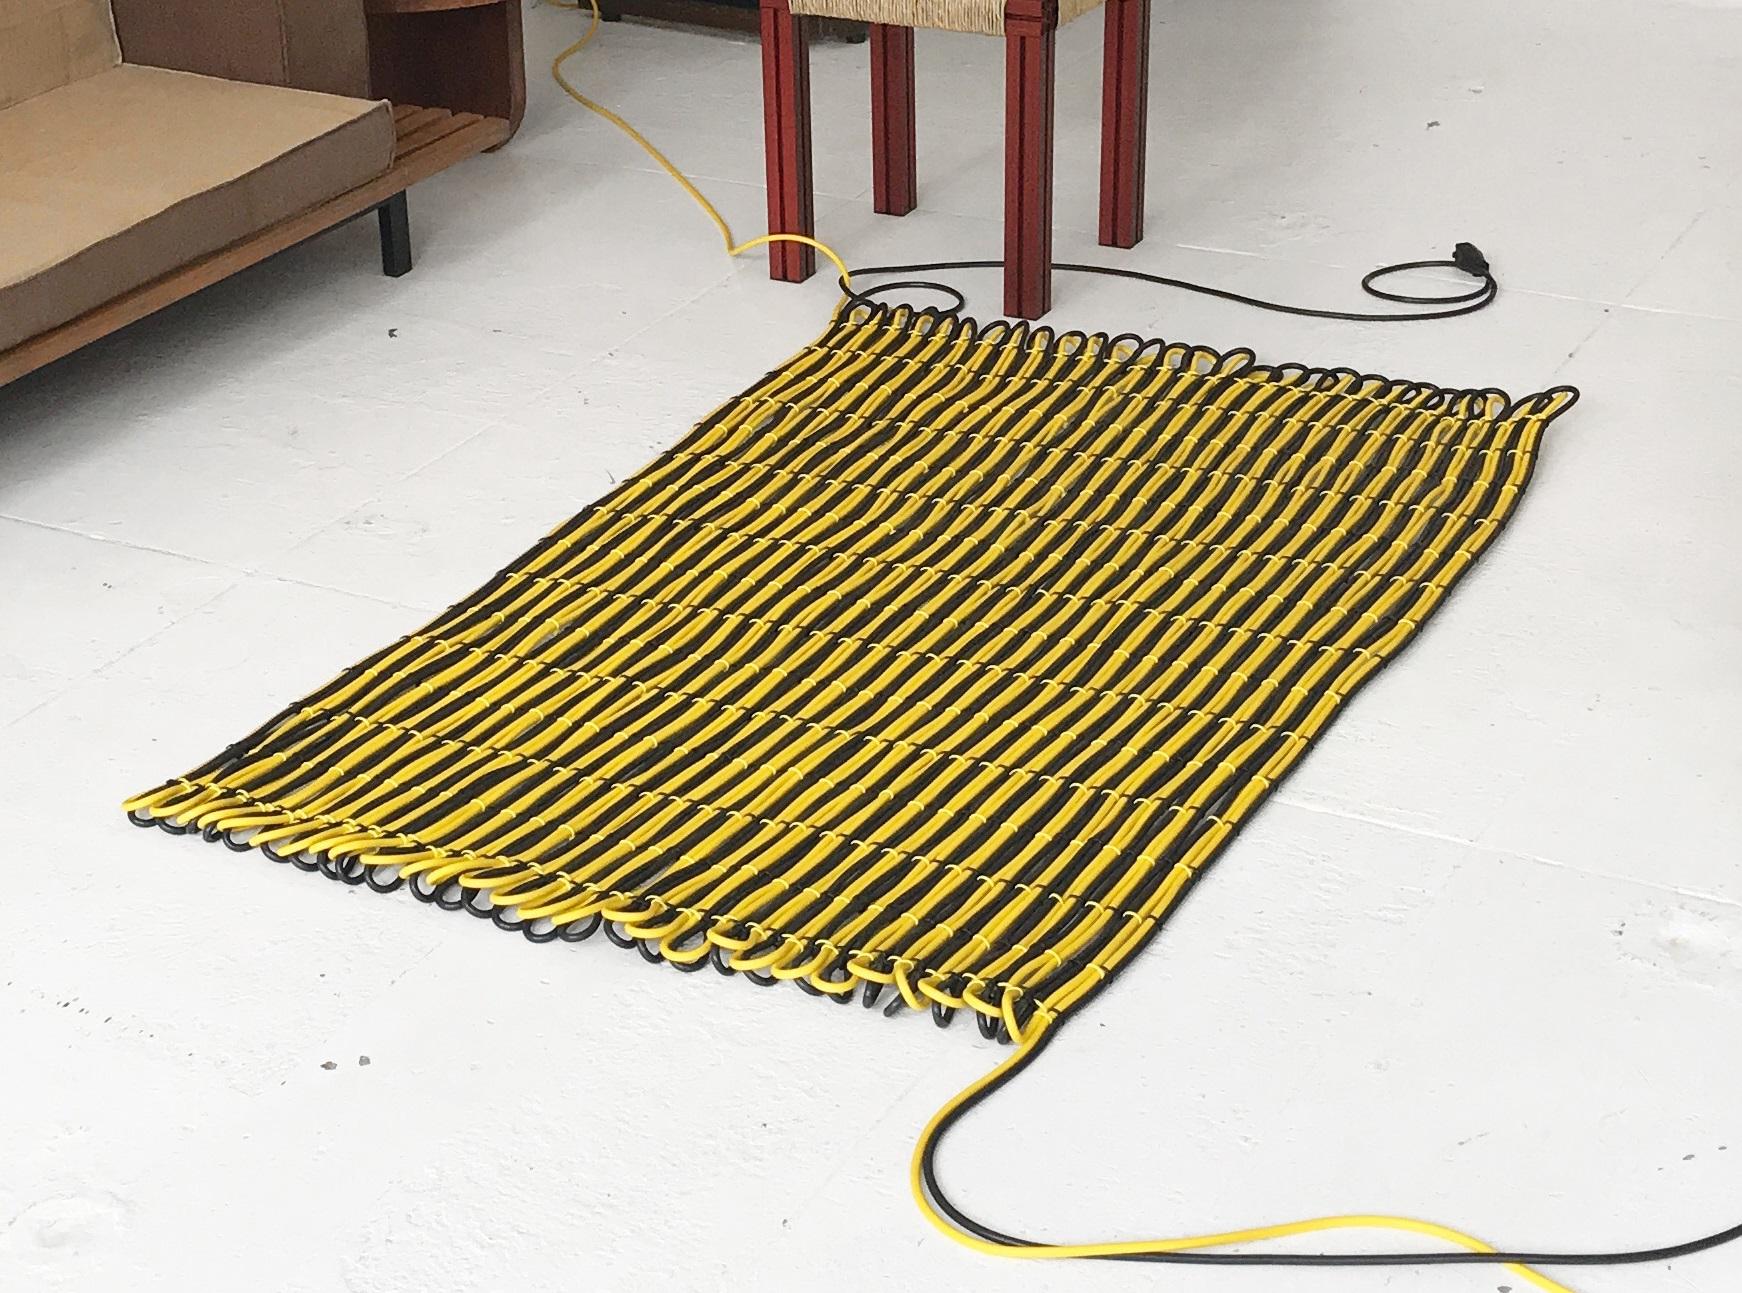 200 Meter cable rug by Tino Seubert.
Dimensions: W 105 x L 160 cm (˜ 1.7 m2 surface).
Materials: PVC electricity cable, cable clips, country specific plug and socket.
Cable colours: black, yellow, orange, blue (two can be mixed). 

Tino